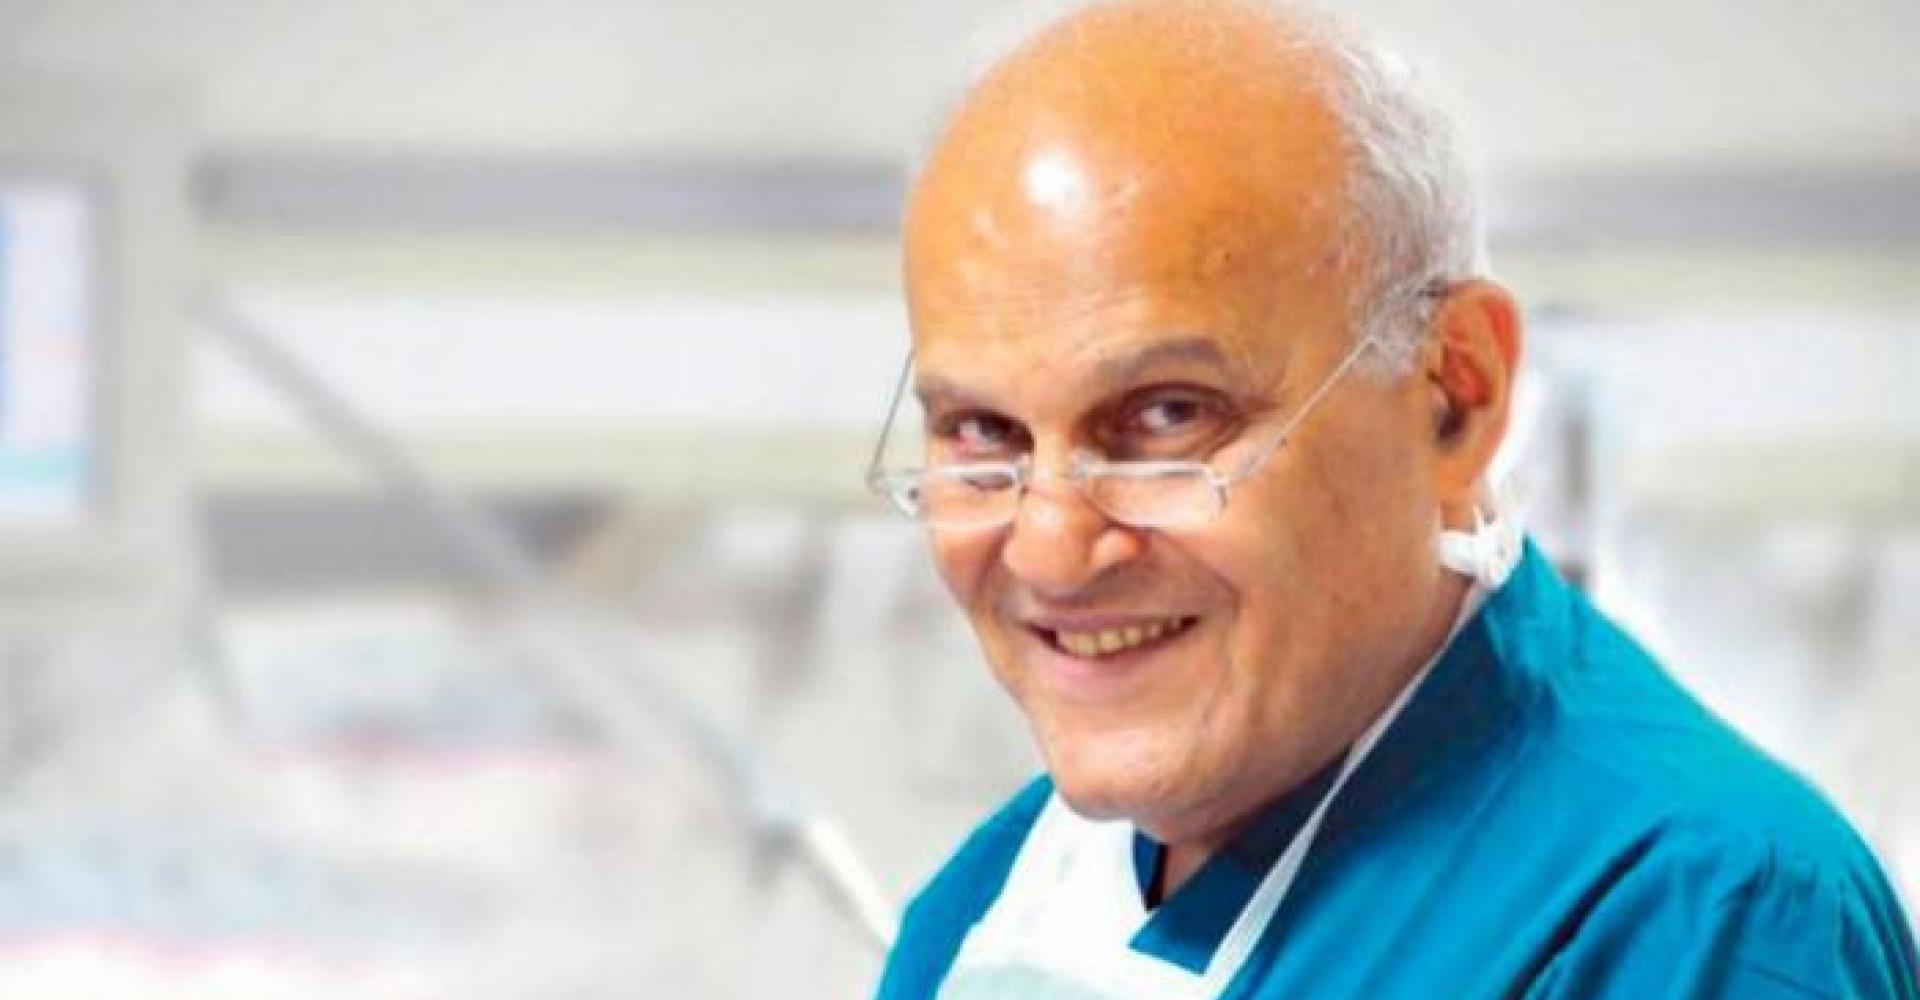 UHS is honored to be working with Dr. Magdi Yacoub to build the 240 bed Cardiac Hospital in Cairo